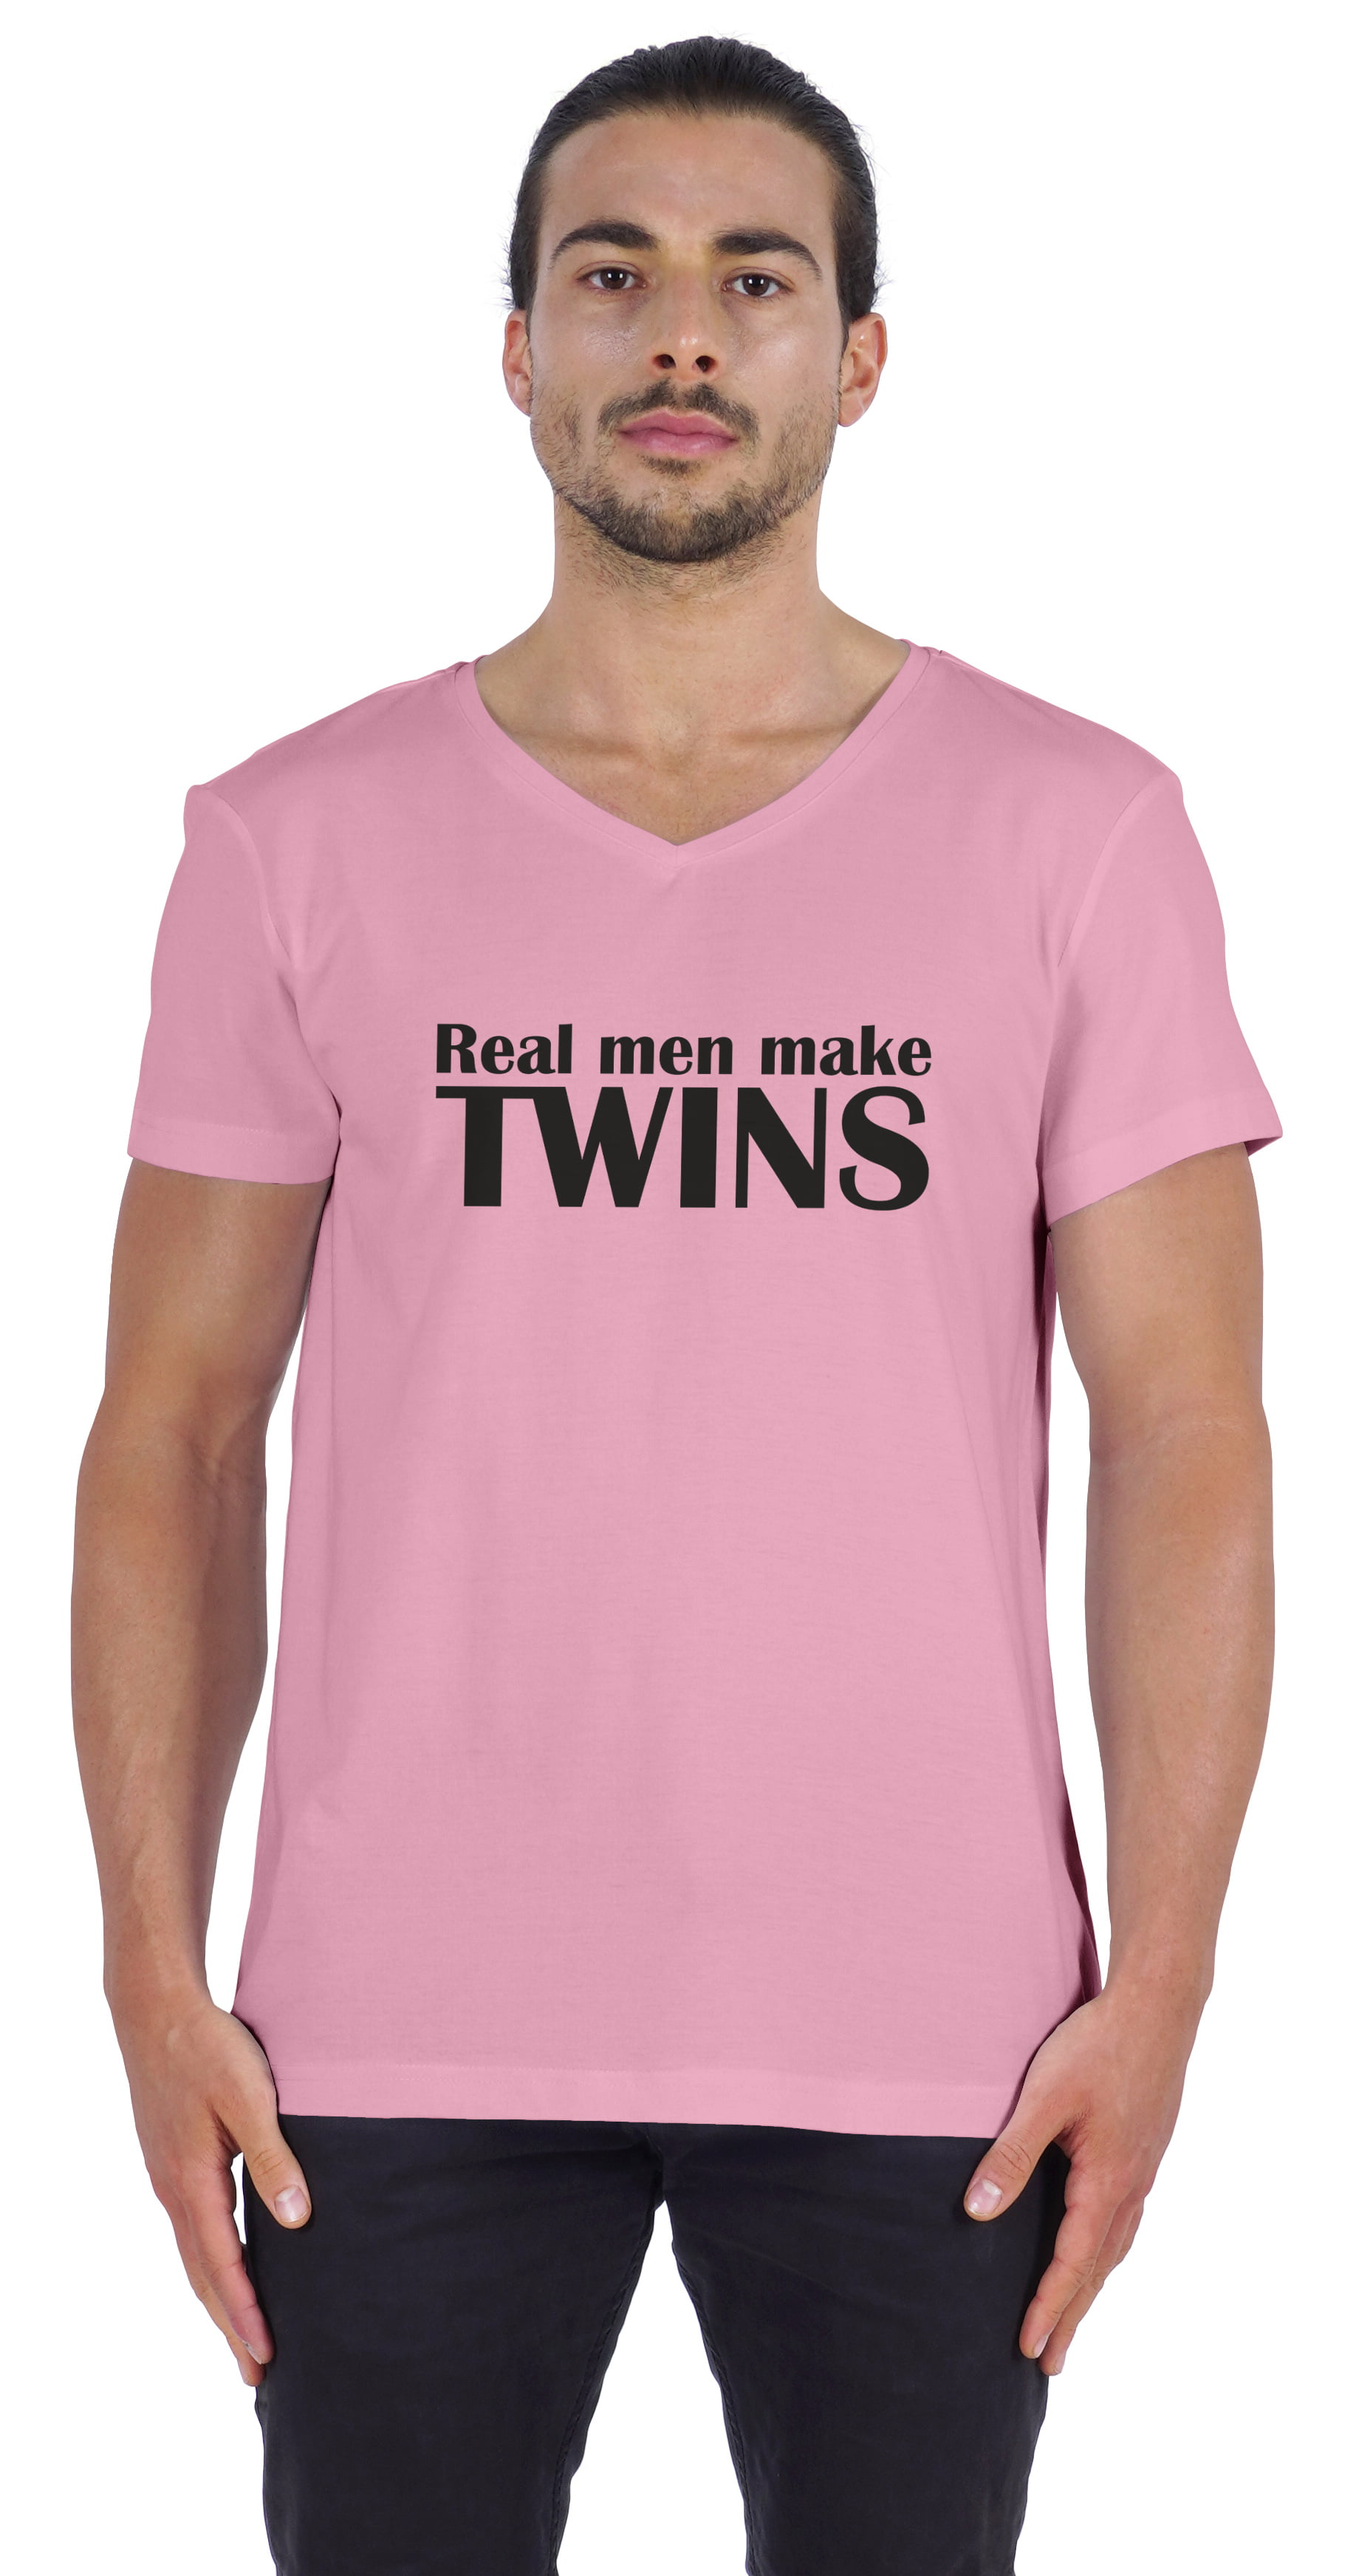 Inkmeso Graphic Tshirt For Twins Baby Dad Real Men Make Twins Tee Shirt  Jersey Shirt Daddy Shirt 